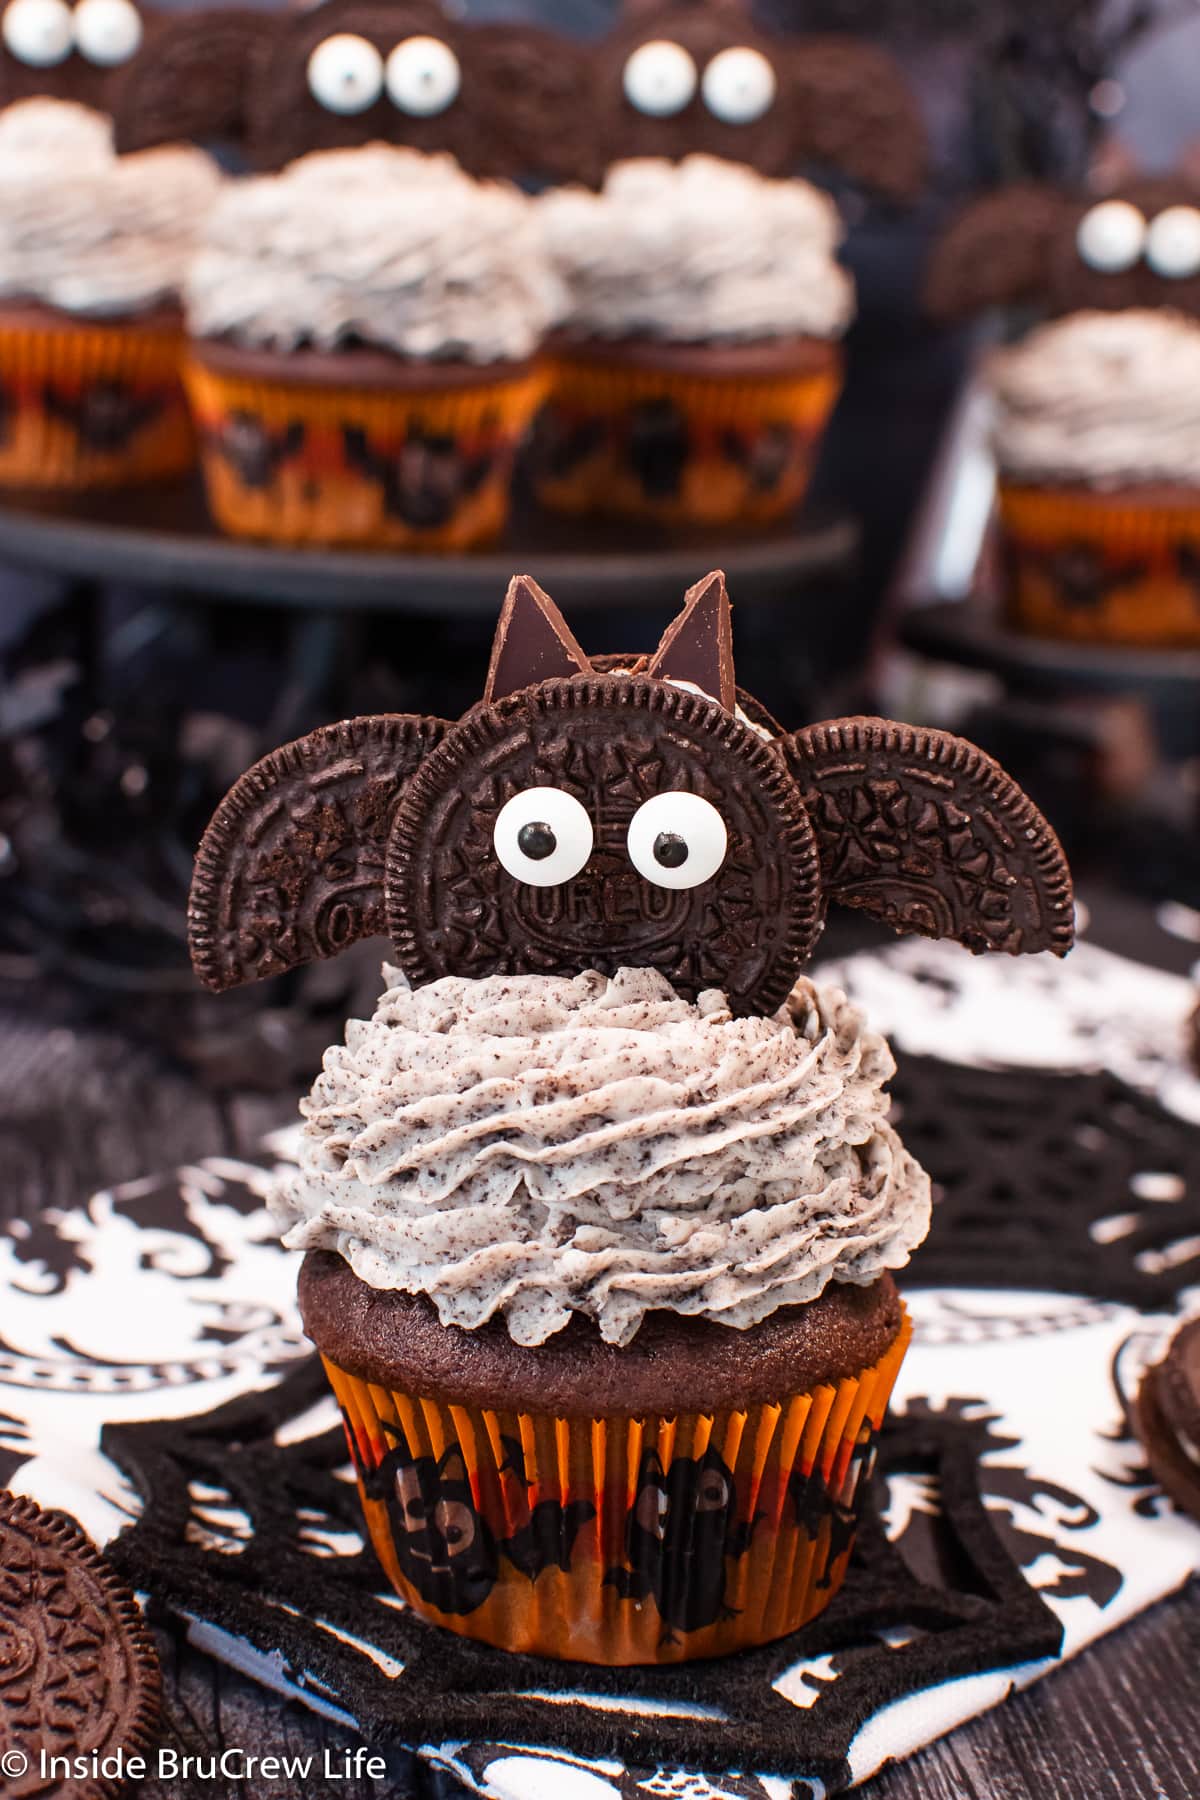 A frosted cupcake topped with a cookie decorated like a bat.